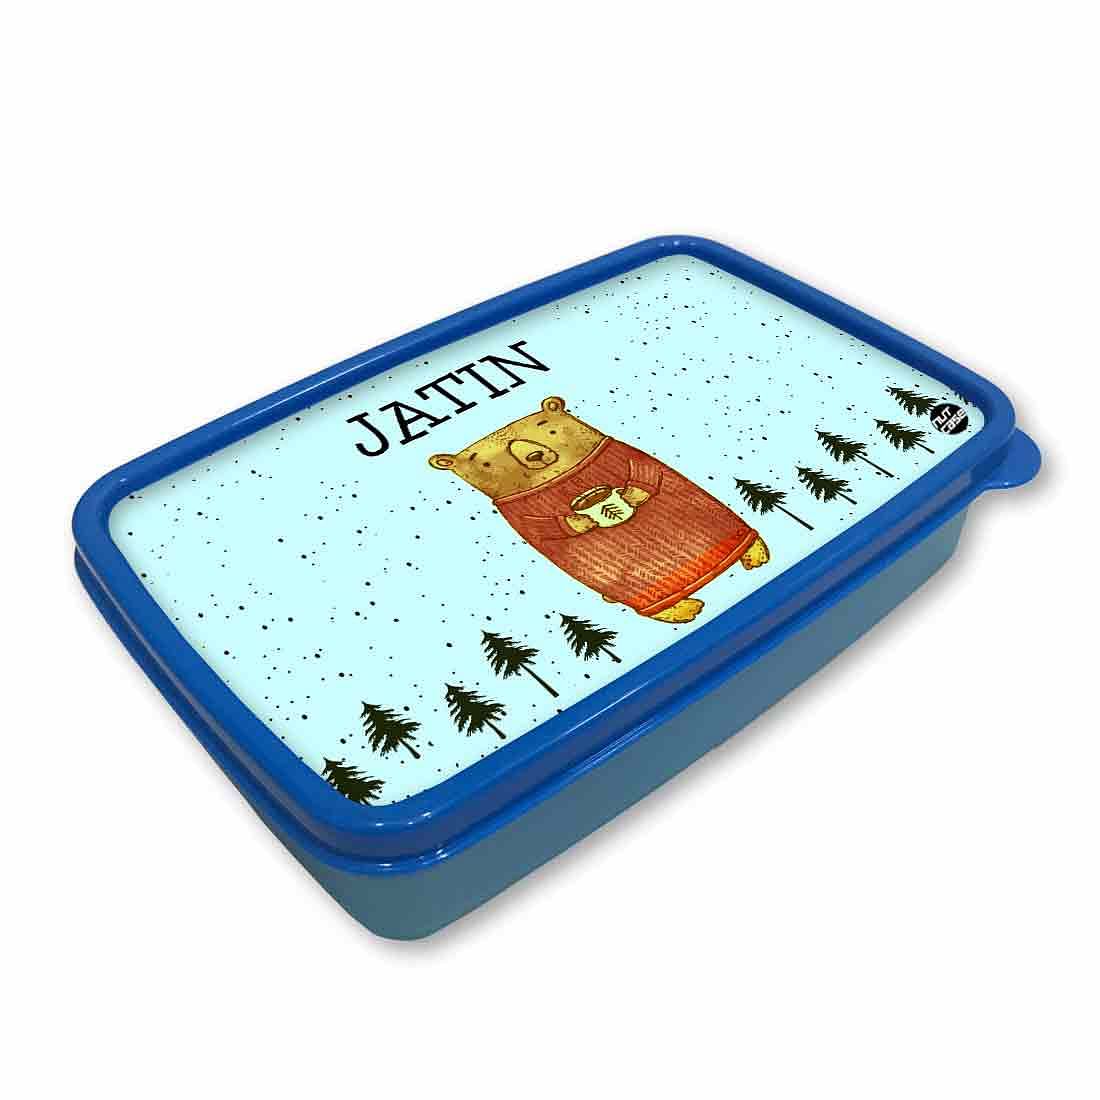 Personalized Snack Box for Kids Plastic Lunch Box for Boys - Cute Bear Nutcase